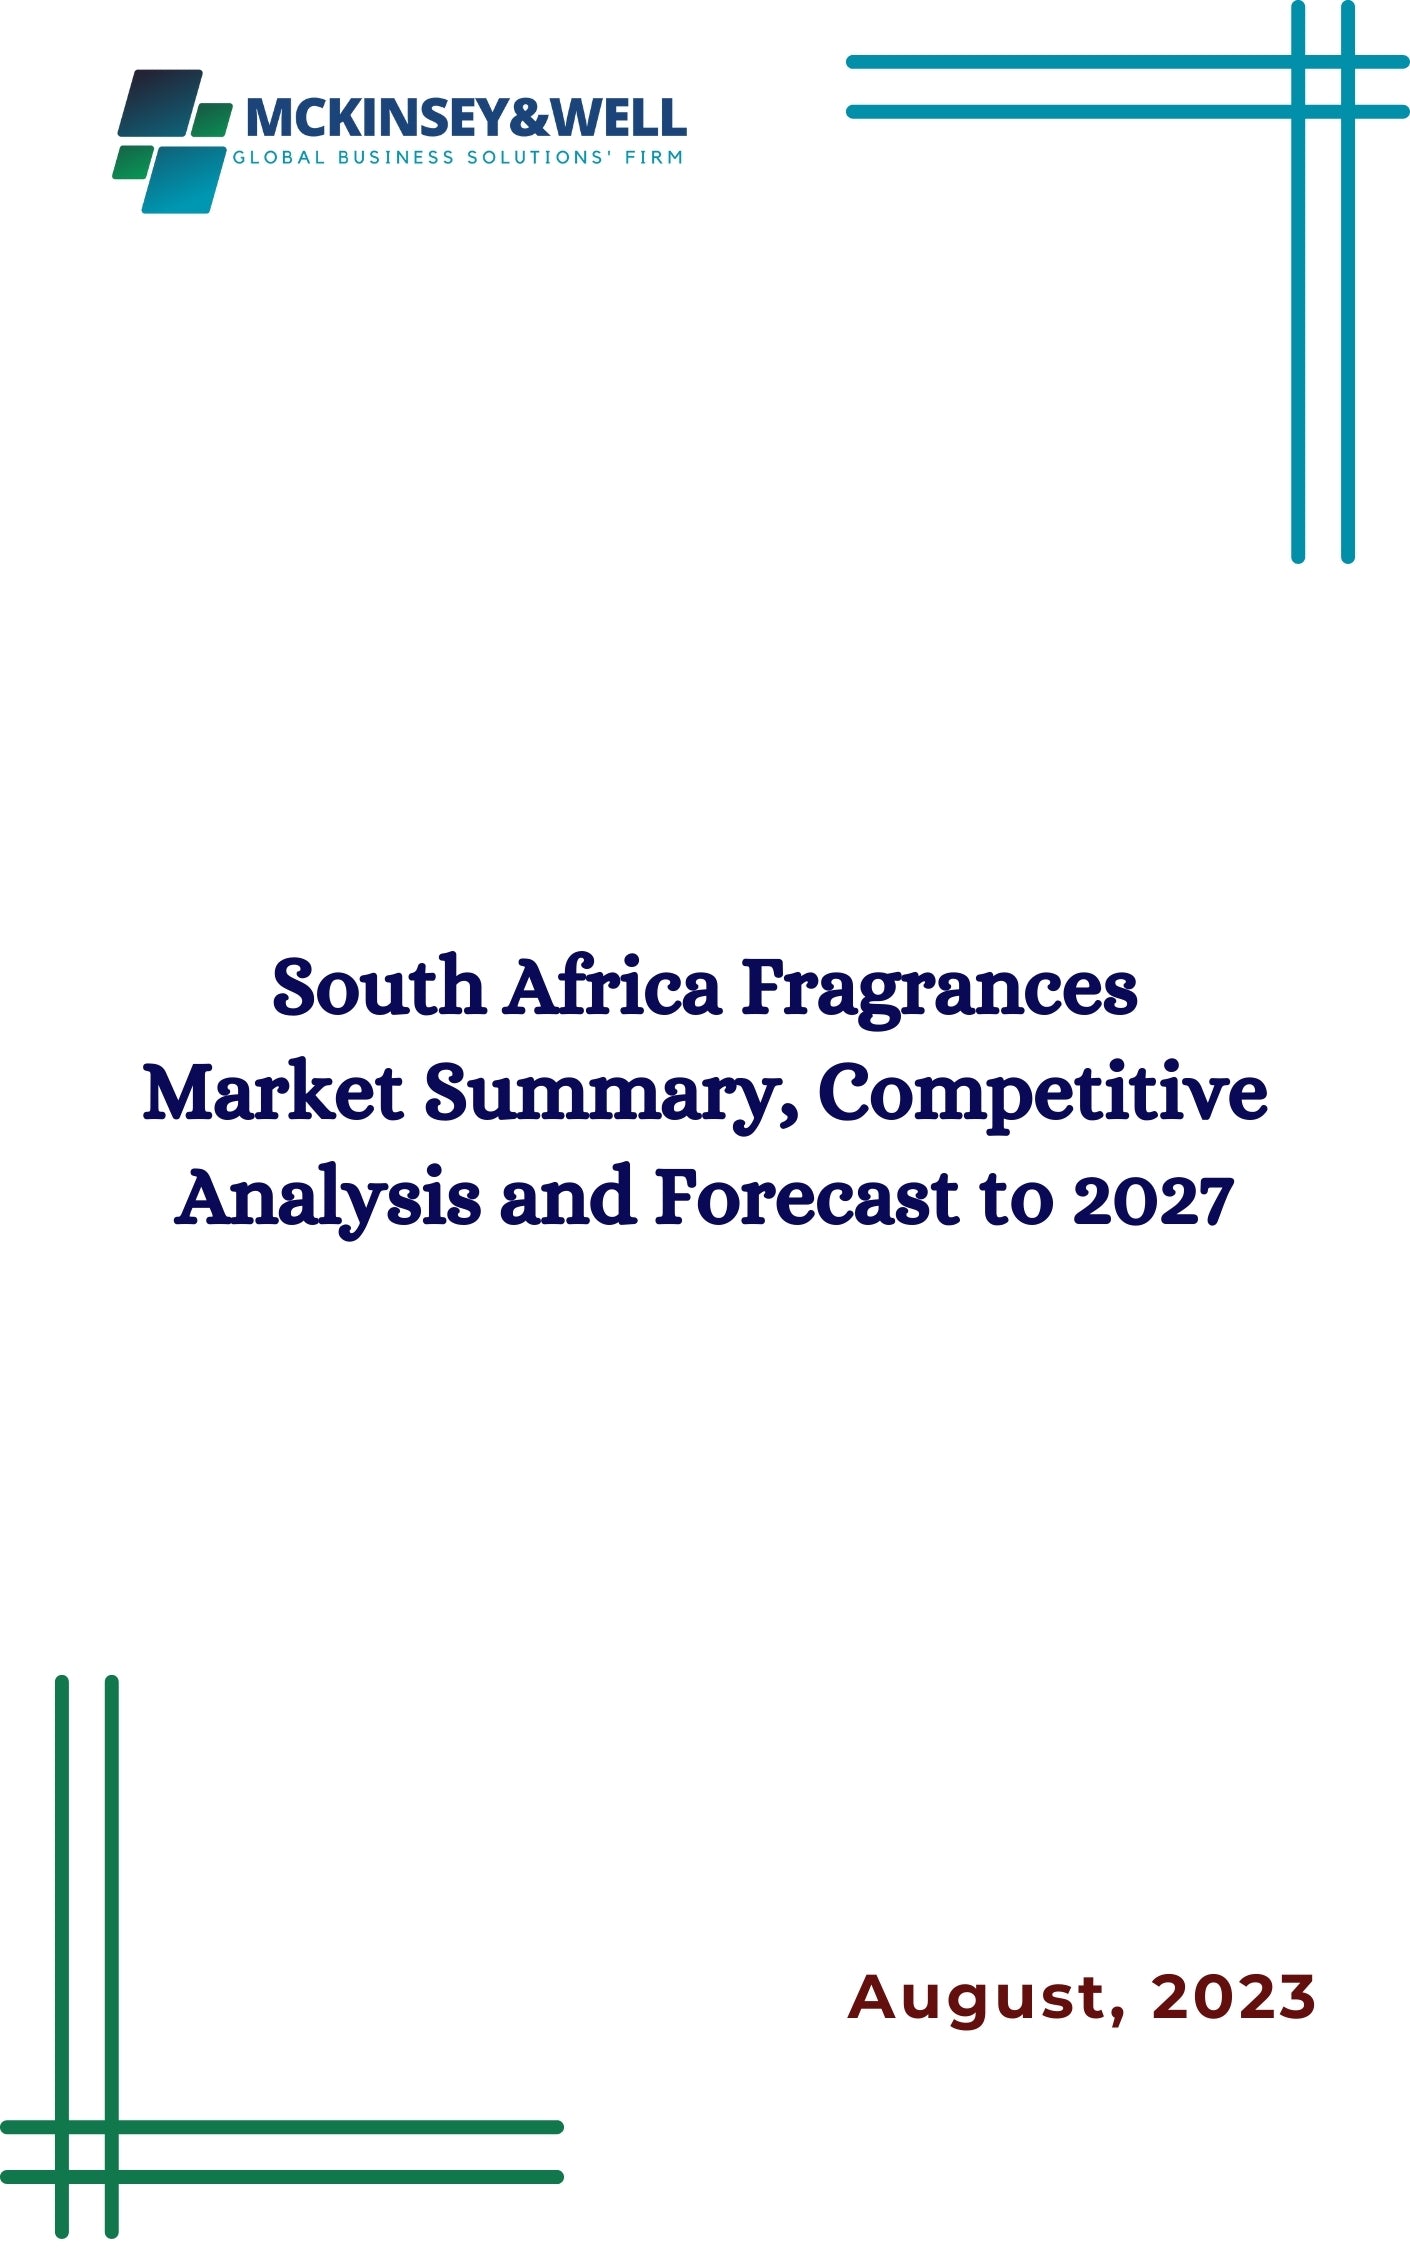 South Africa Fragrances Market Summary, Competitive Analysis and Forecast to 2027